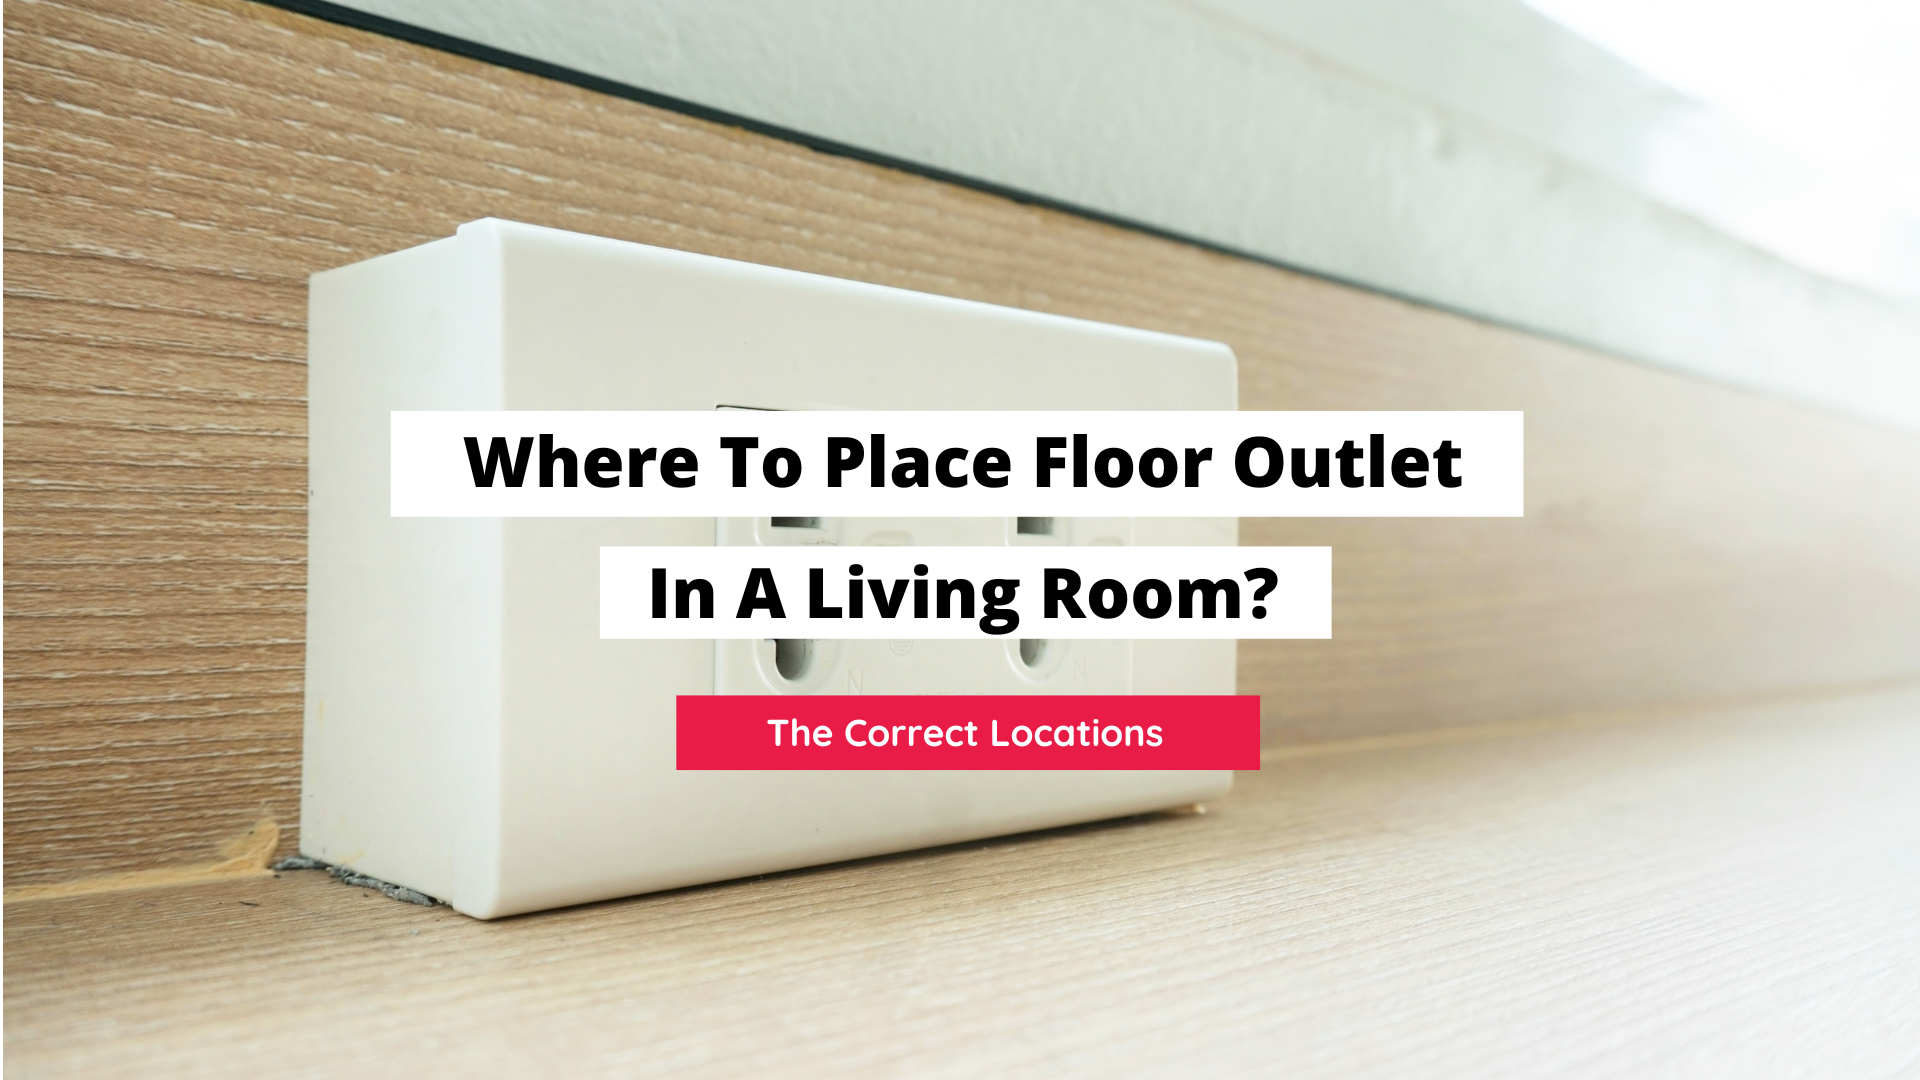 where to place floor outlets, floor outlets, floor outlets in living room